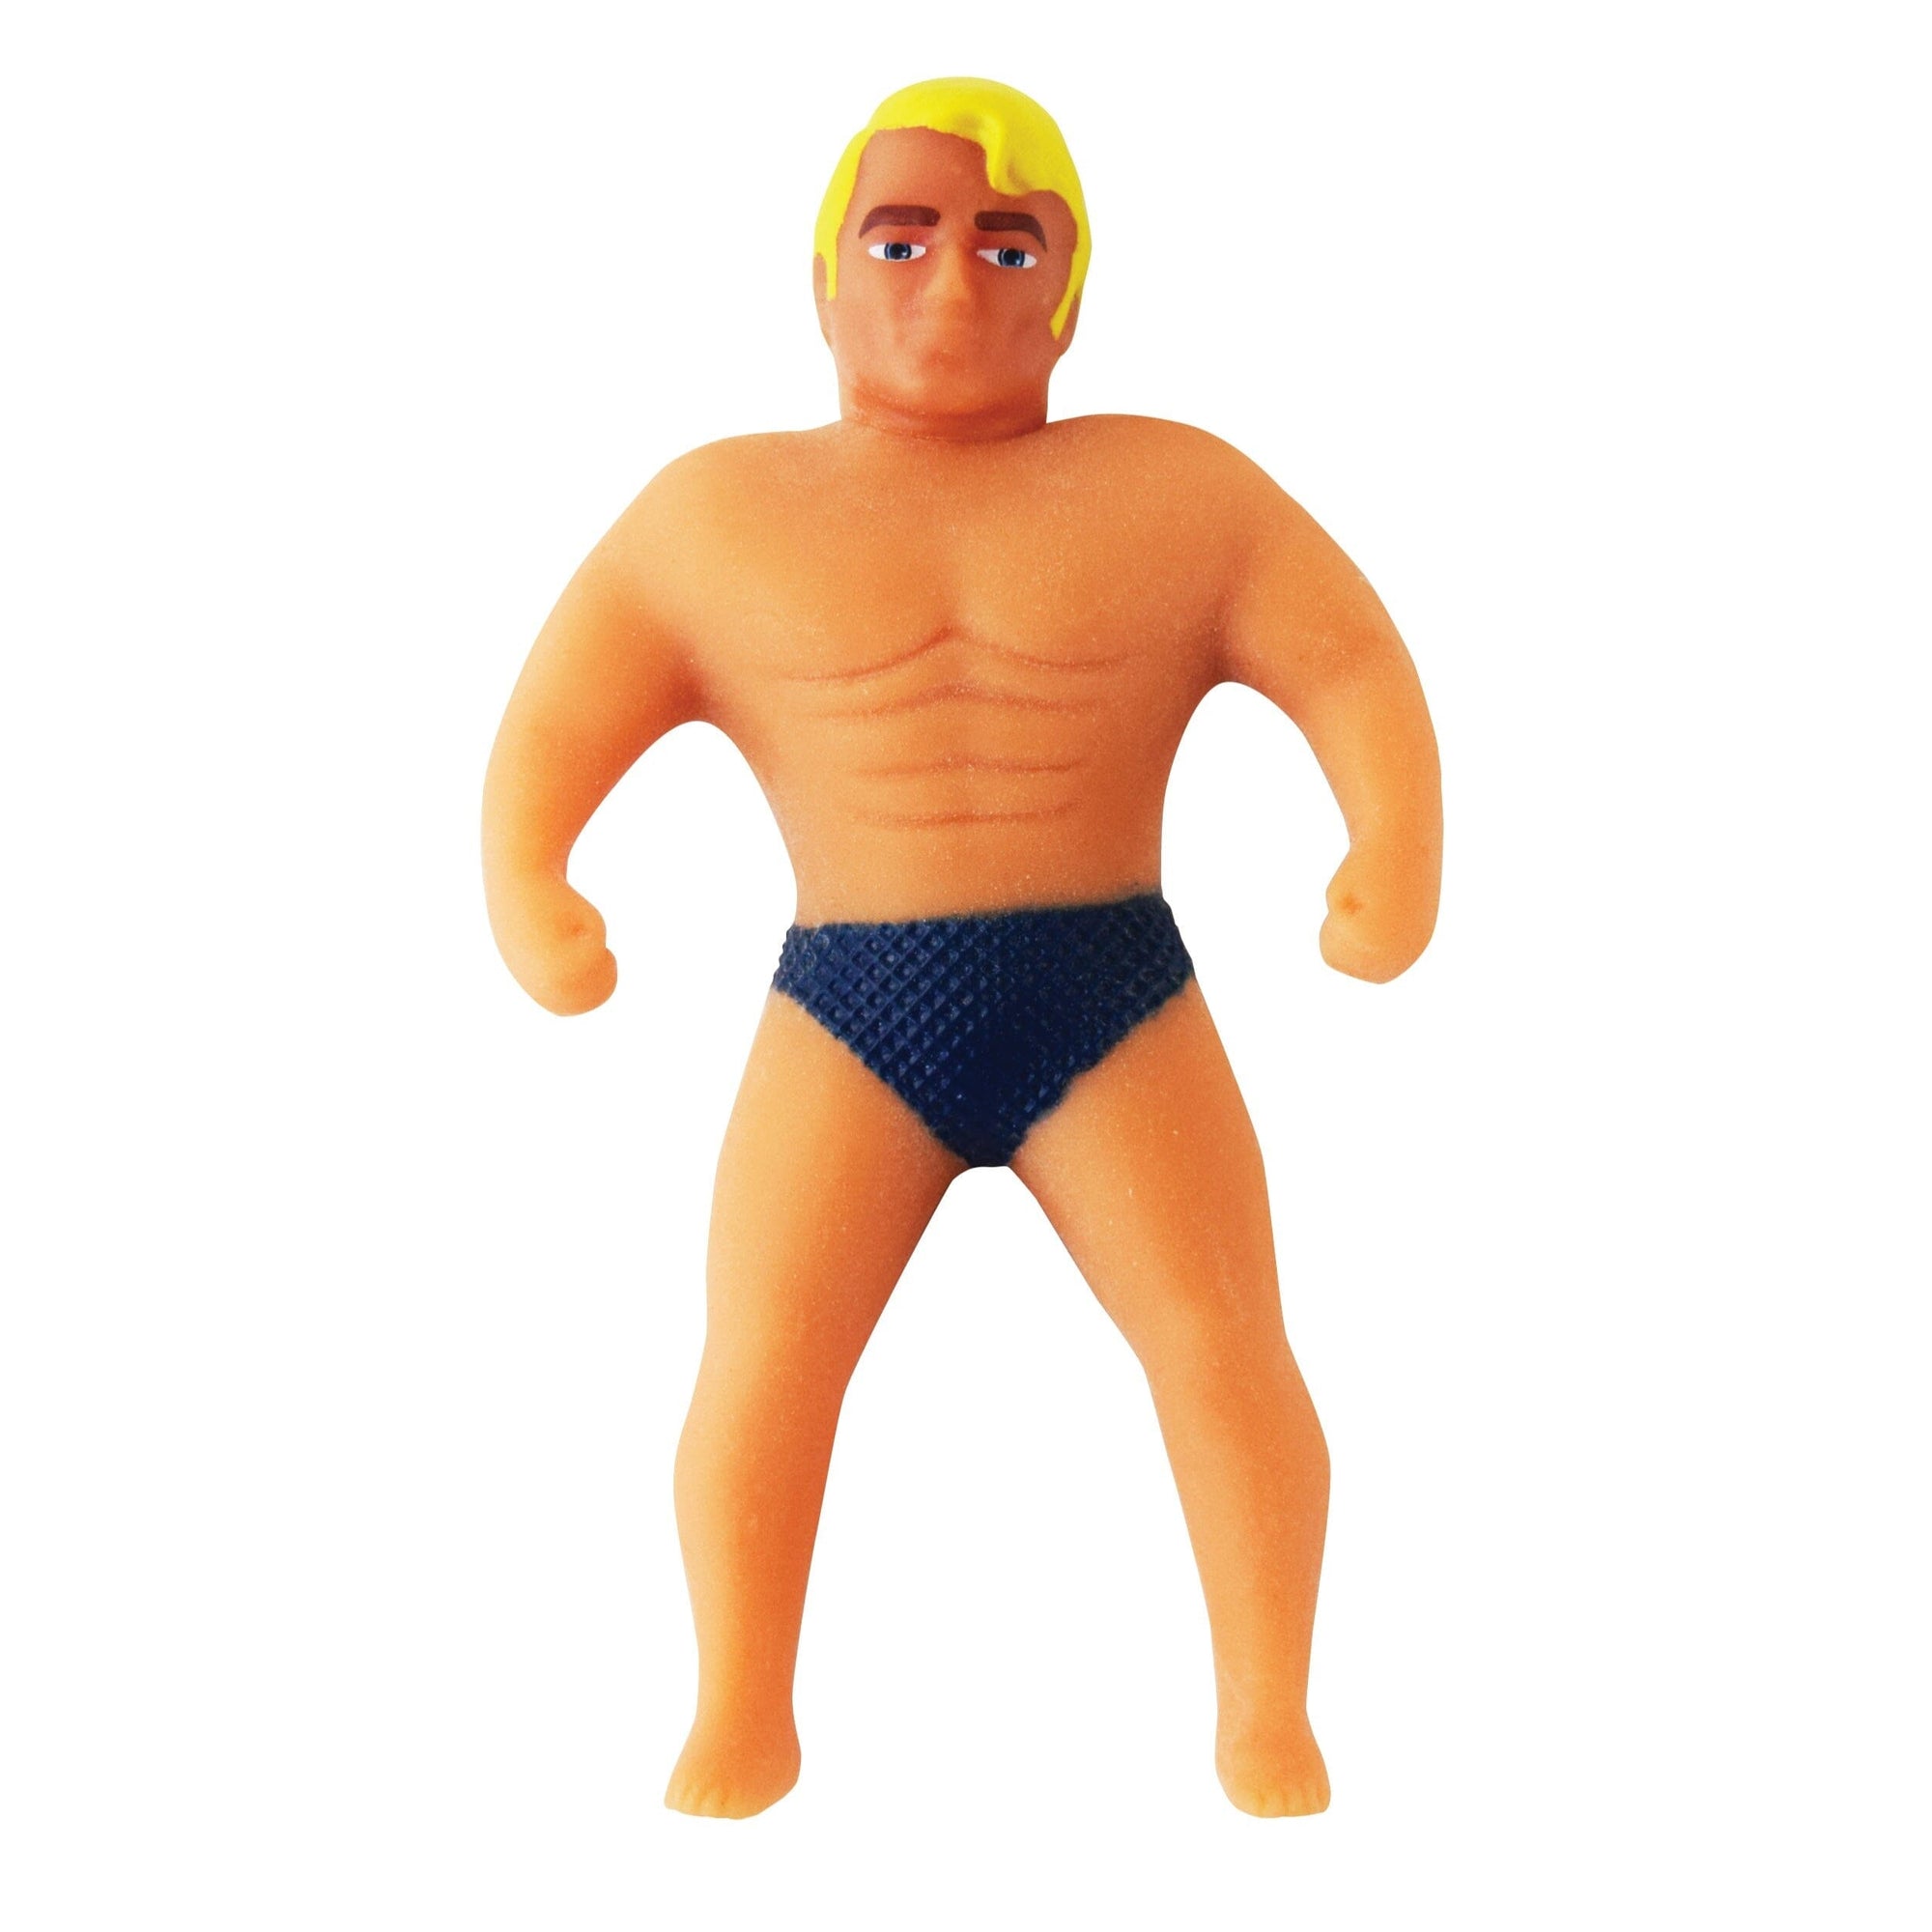 World's Smallest Stretch Armstrong Super Impulse 